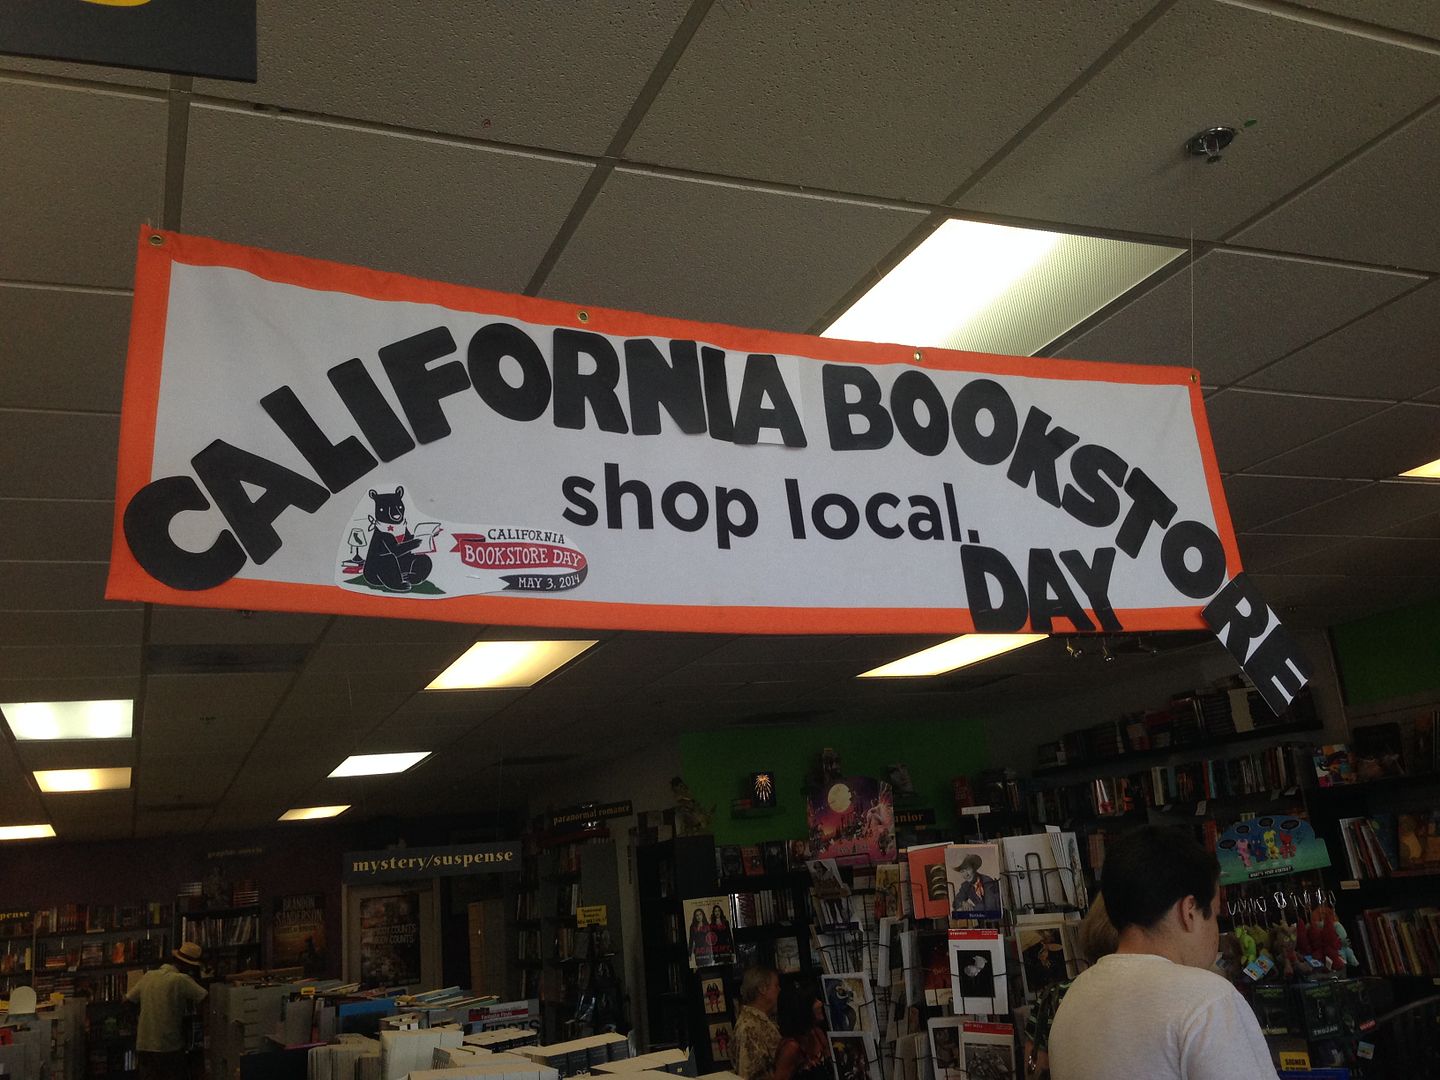 The time it was California Bookstore Day